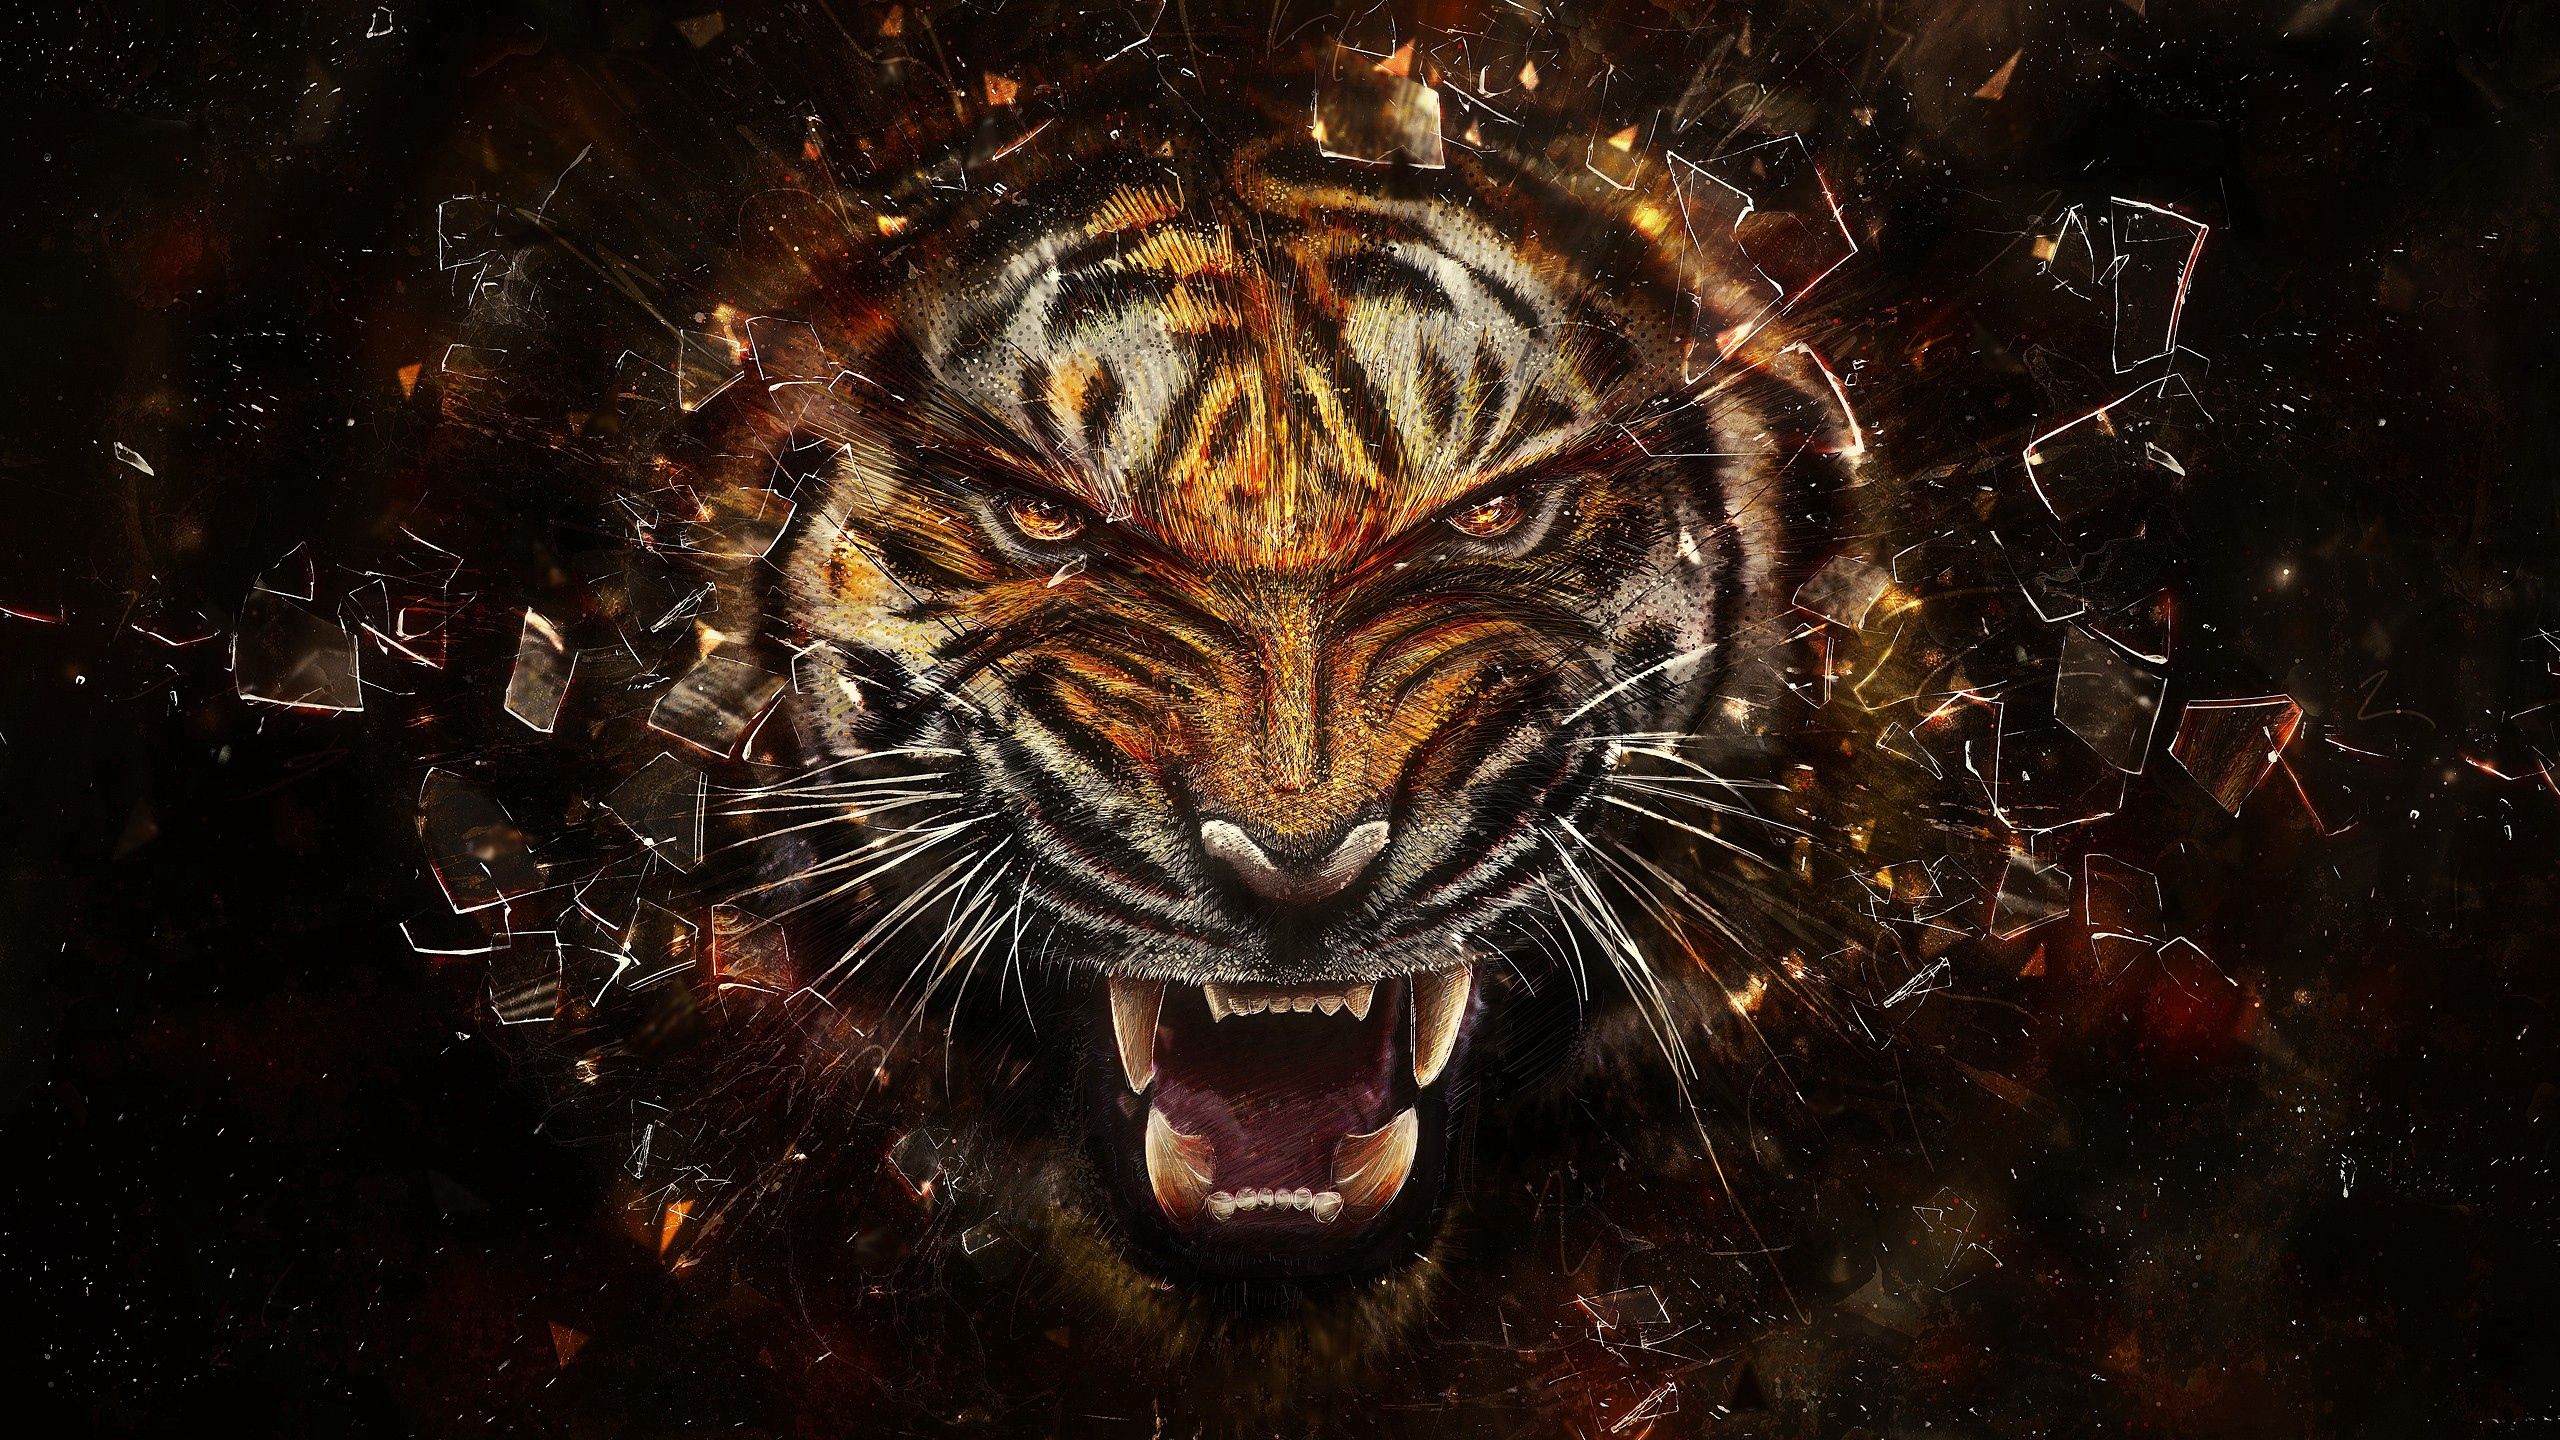 smithereens, tiger, abstract, aggression, grin, glass, shards